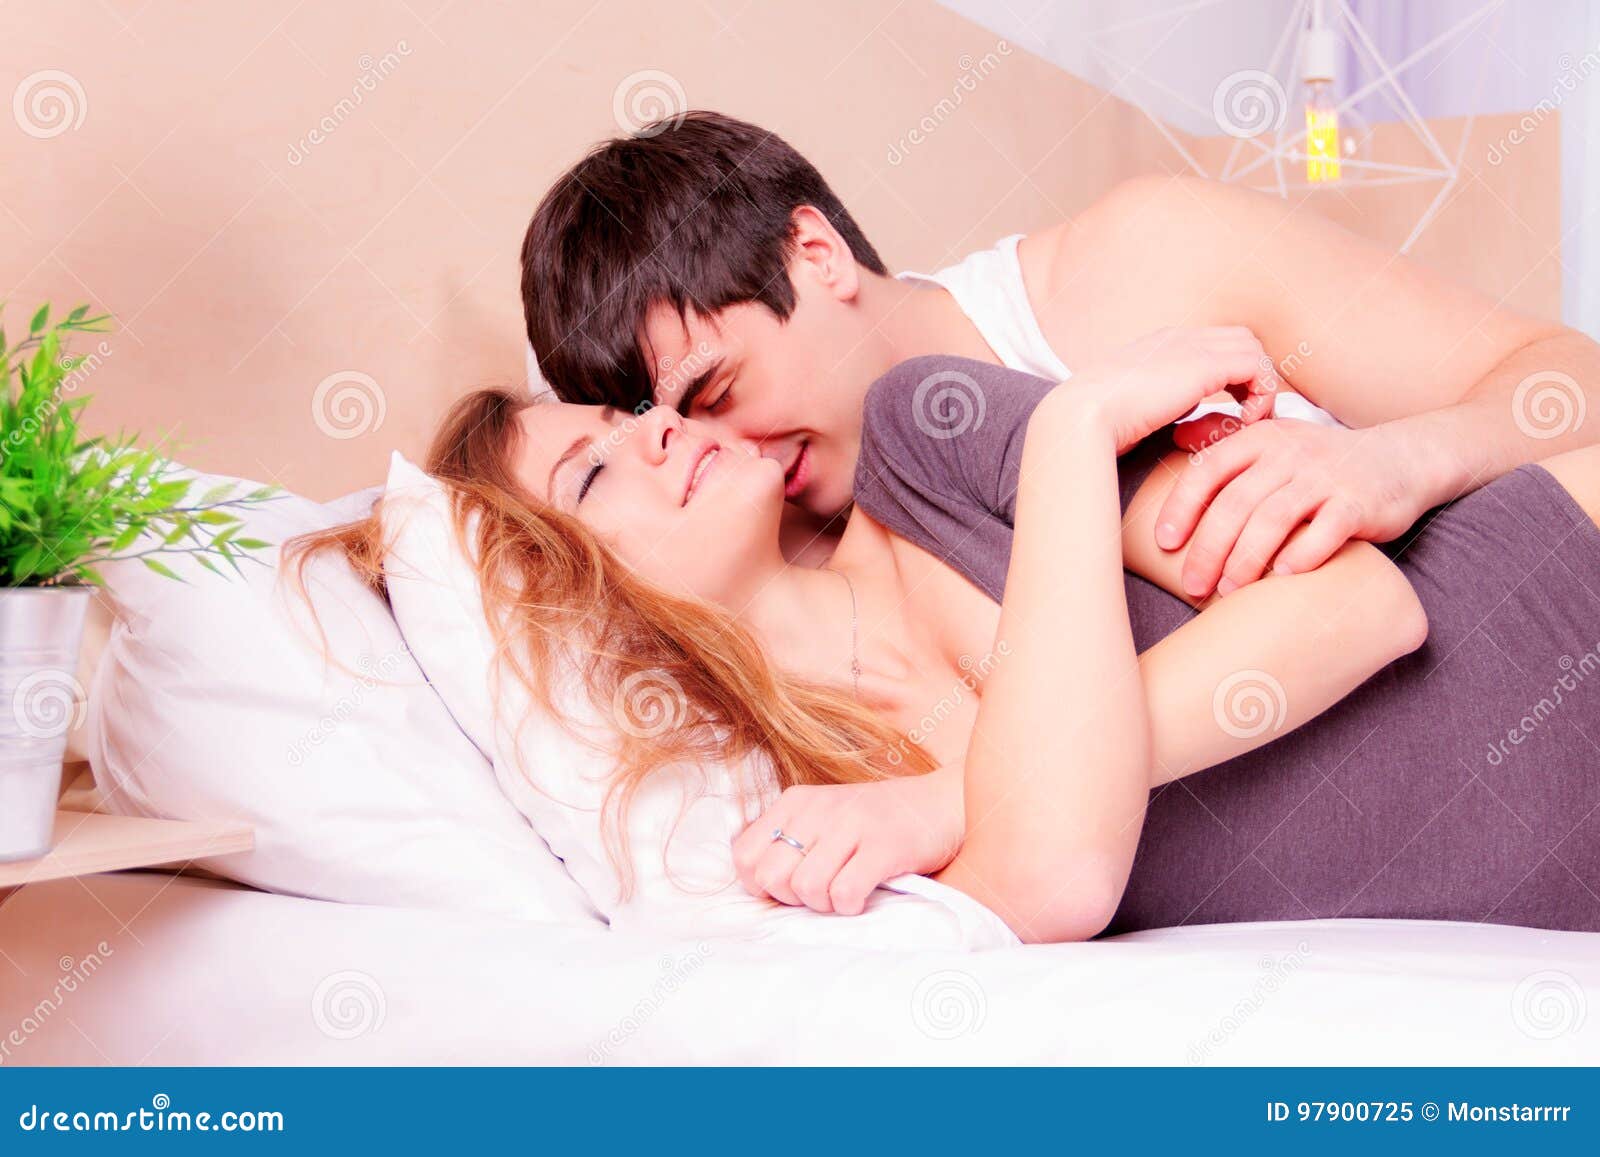 Romantic Couple in Love in Bed Stock Image - Image of lifestyle ...